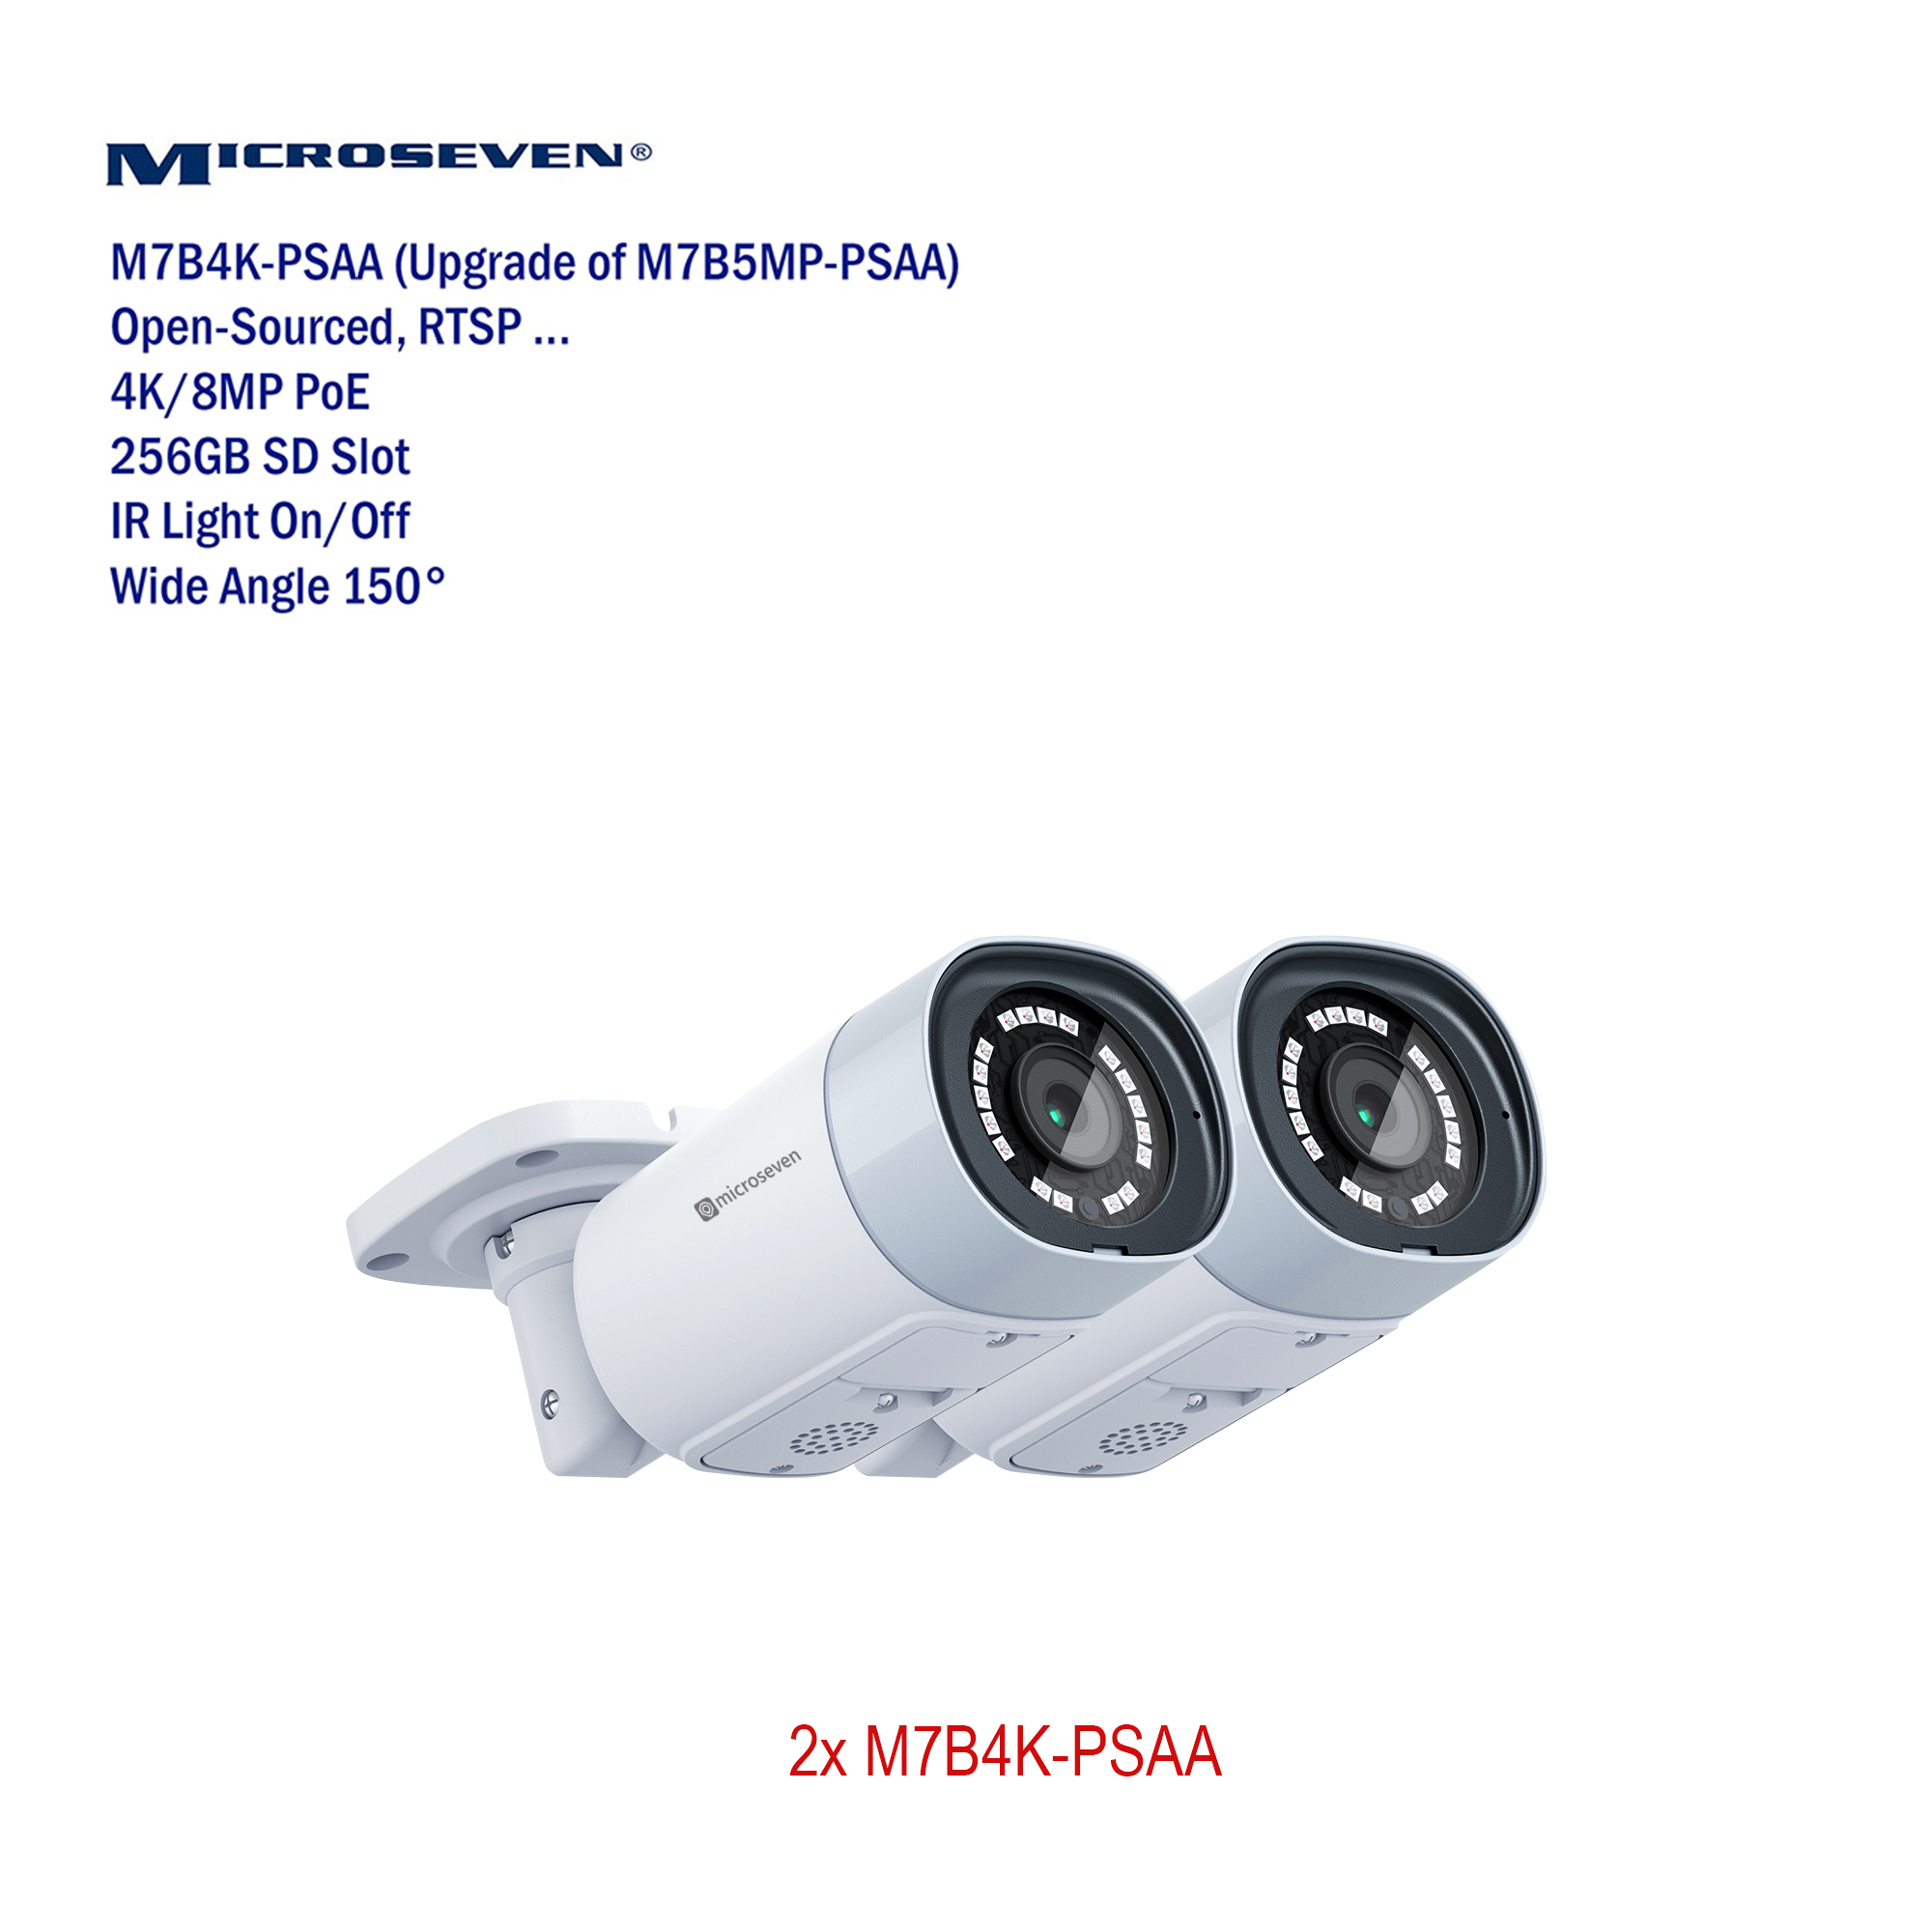 2x Microseven Open Source Ultra HD 4K/8MP(3840x2160) PoE SONY 1/2.8" Chipset CMOS 2.8mm 8MP Lens Ultra-Wide Angle, Two-Way Audio with Built-in Amplified Microphone and Speaker plug and Play ONVIF, IR Light (On/Off in the APP) Security Outdoor IP Camera, Human/Vehicle Detection, 256GB SD Slot, Day & Night, Web GUI & Apps, CMS (Camera Management System) M7 Cloud Storage and Broadcasting on YouTube & Microseven